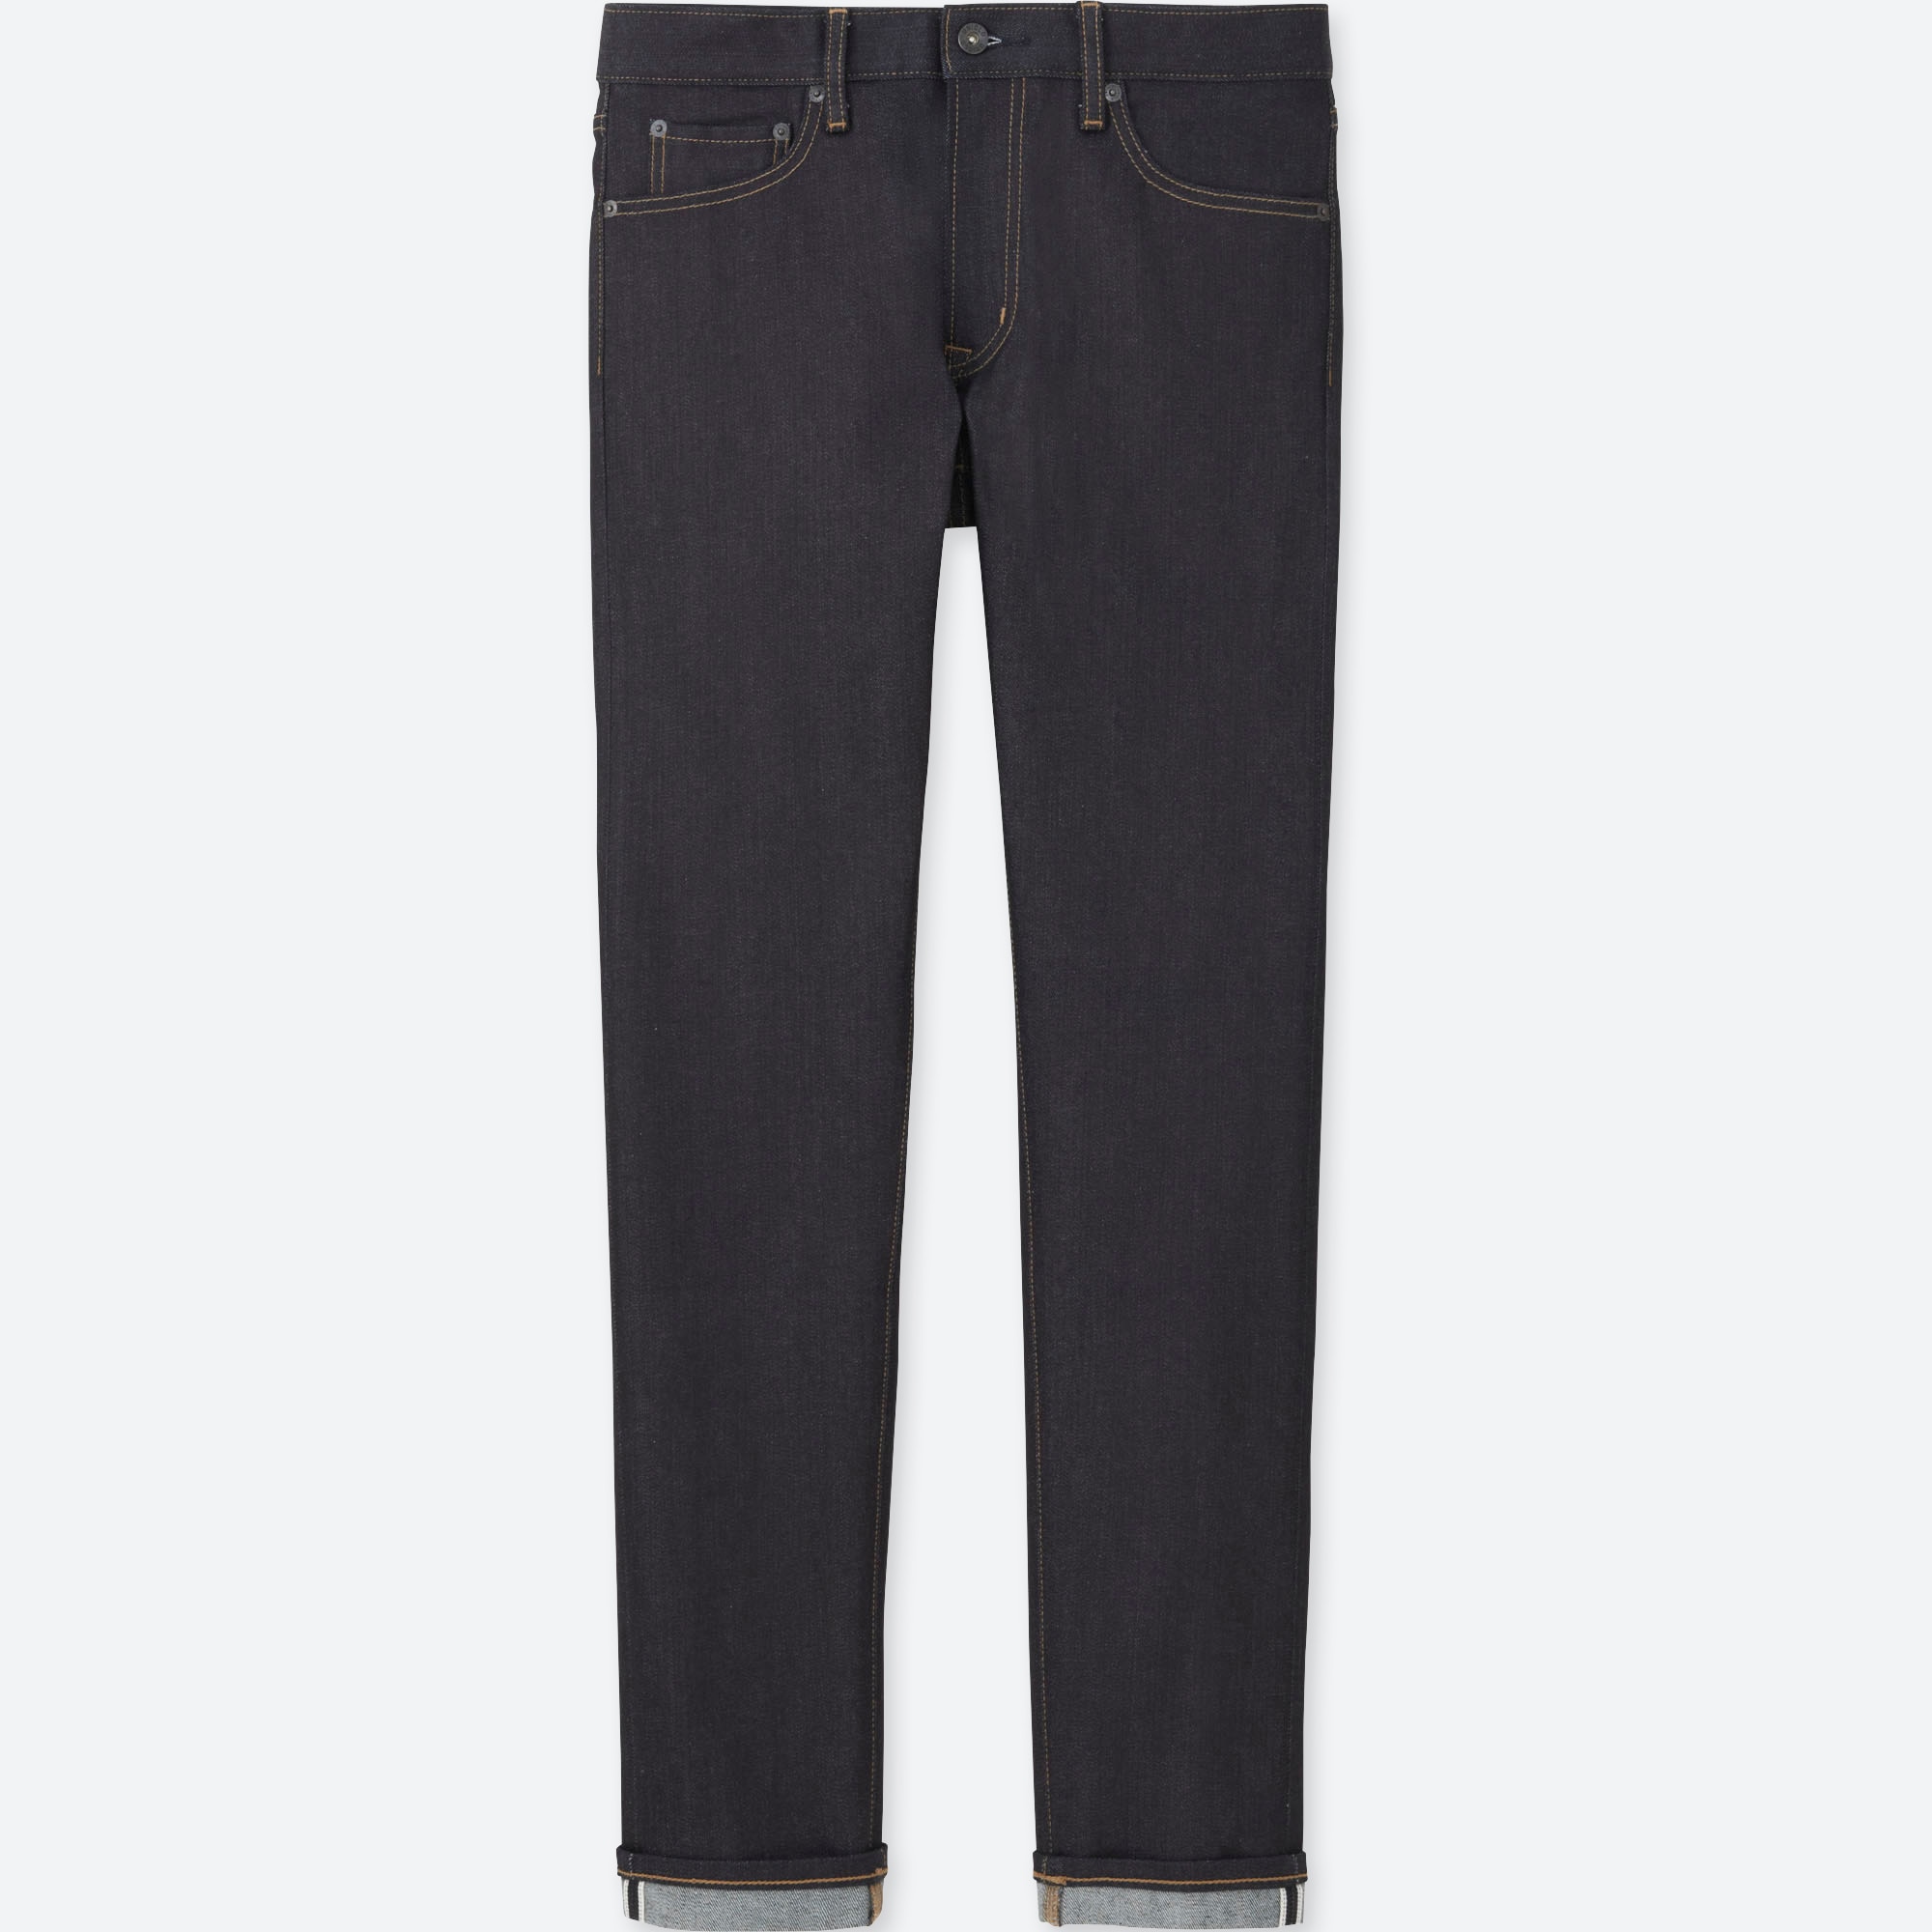 MEN SELVEDGE SKINNY FIT TAPERED JEANS | UNIQLO US